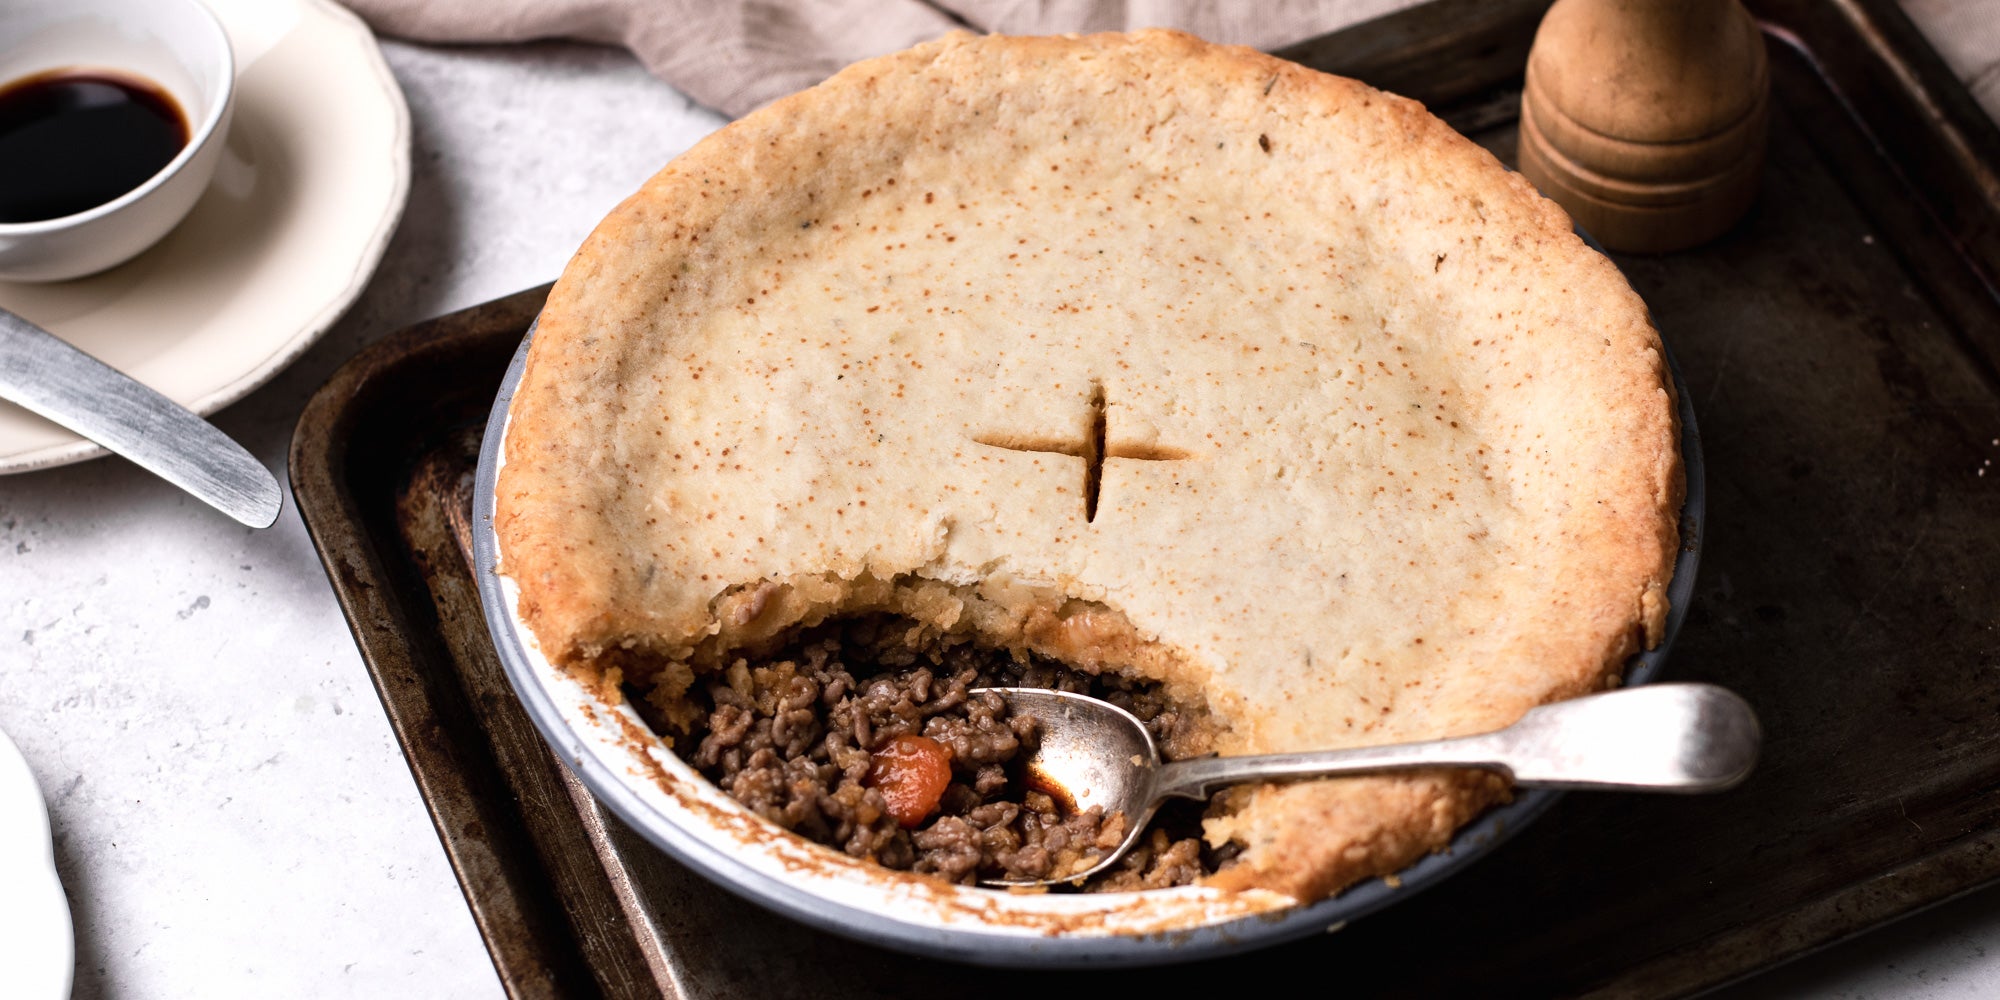 Close up of Suet Crusted Beef & Onion Pie, with a spoon inside the filling. Served on a baking tray